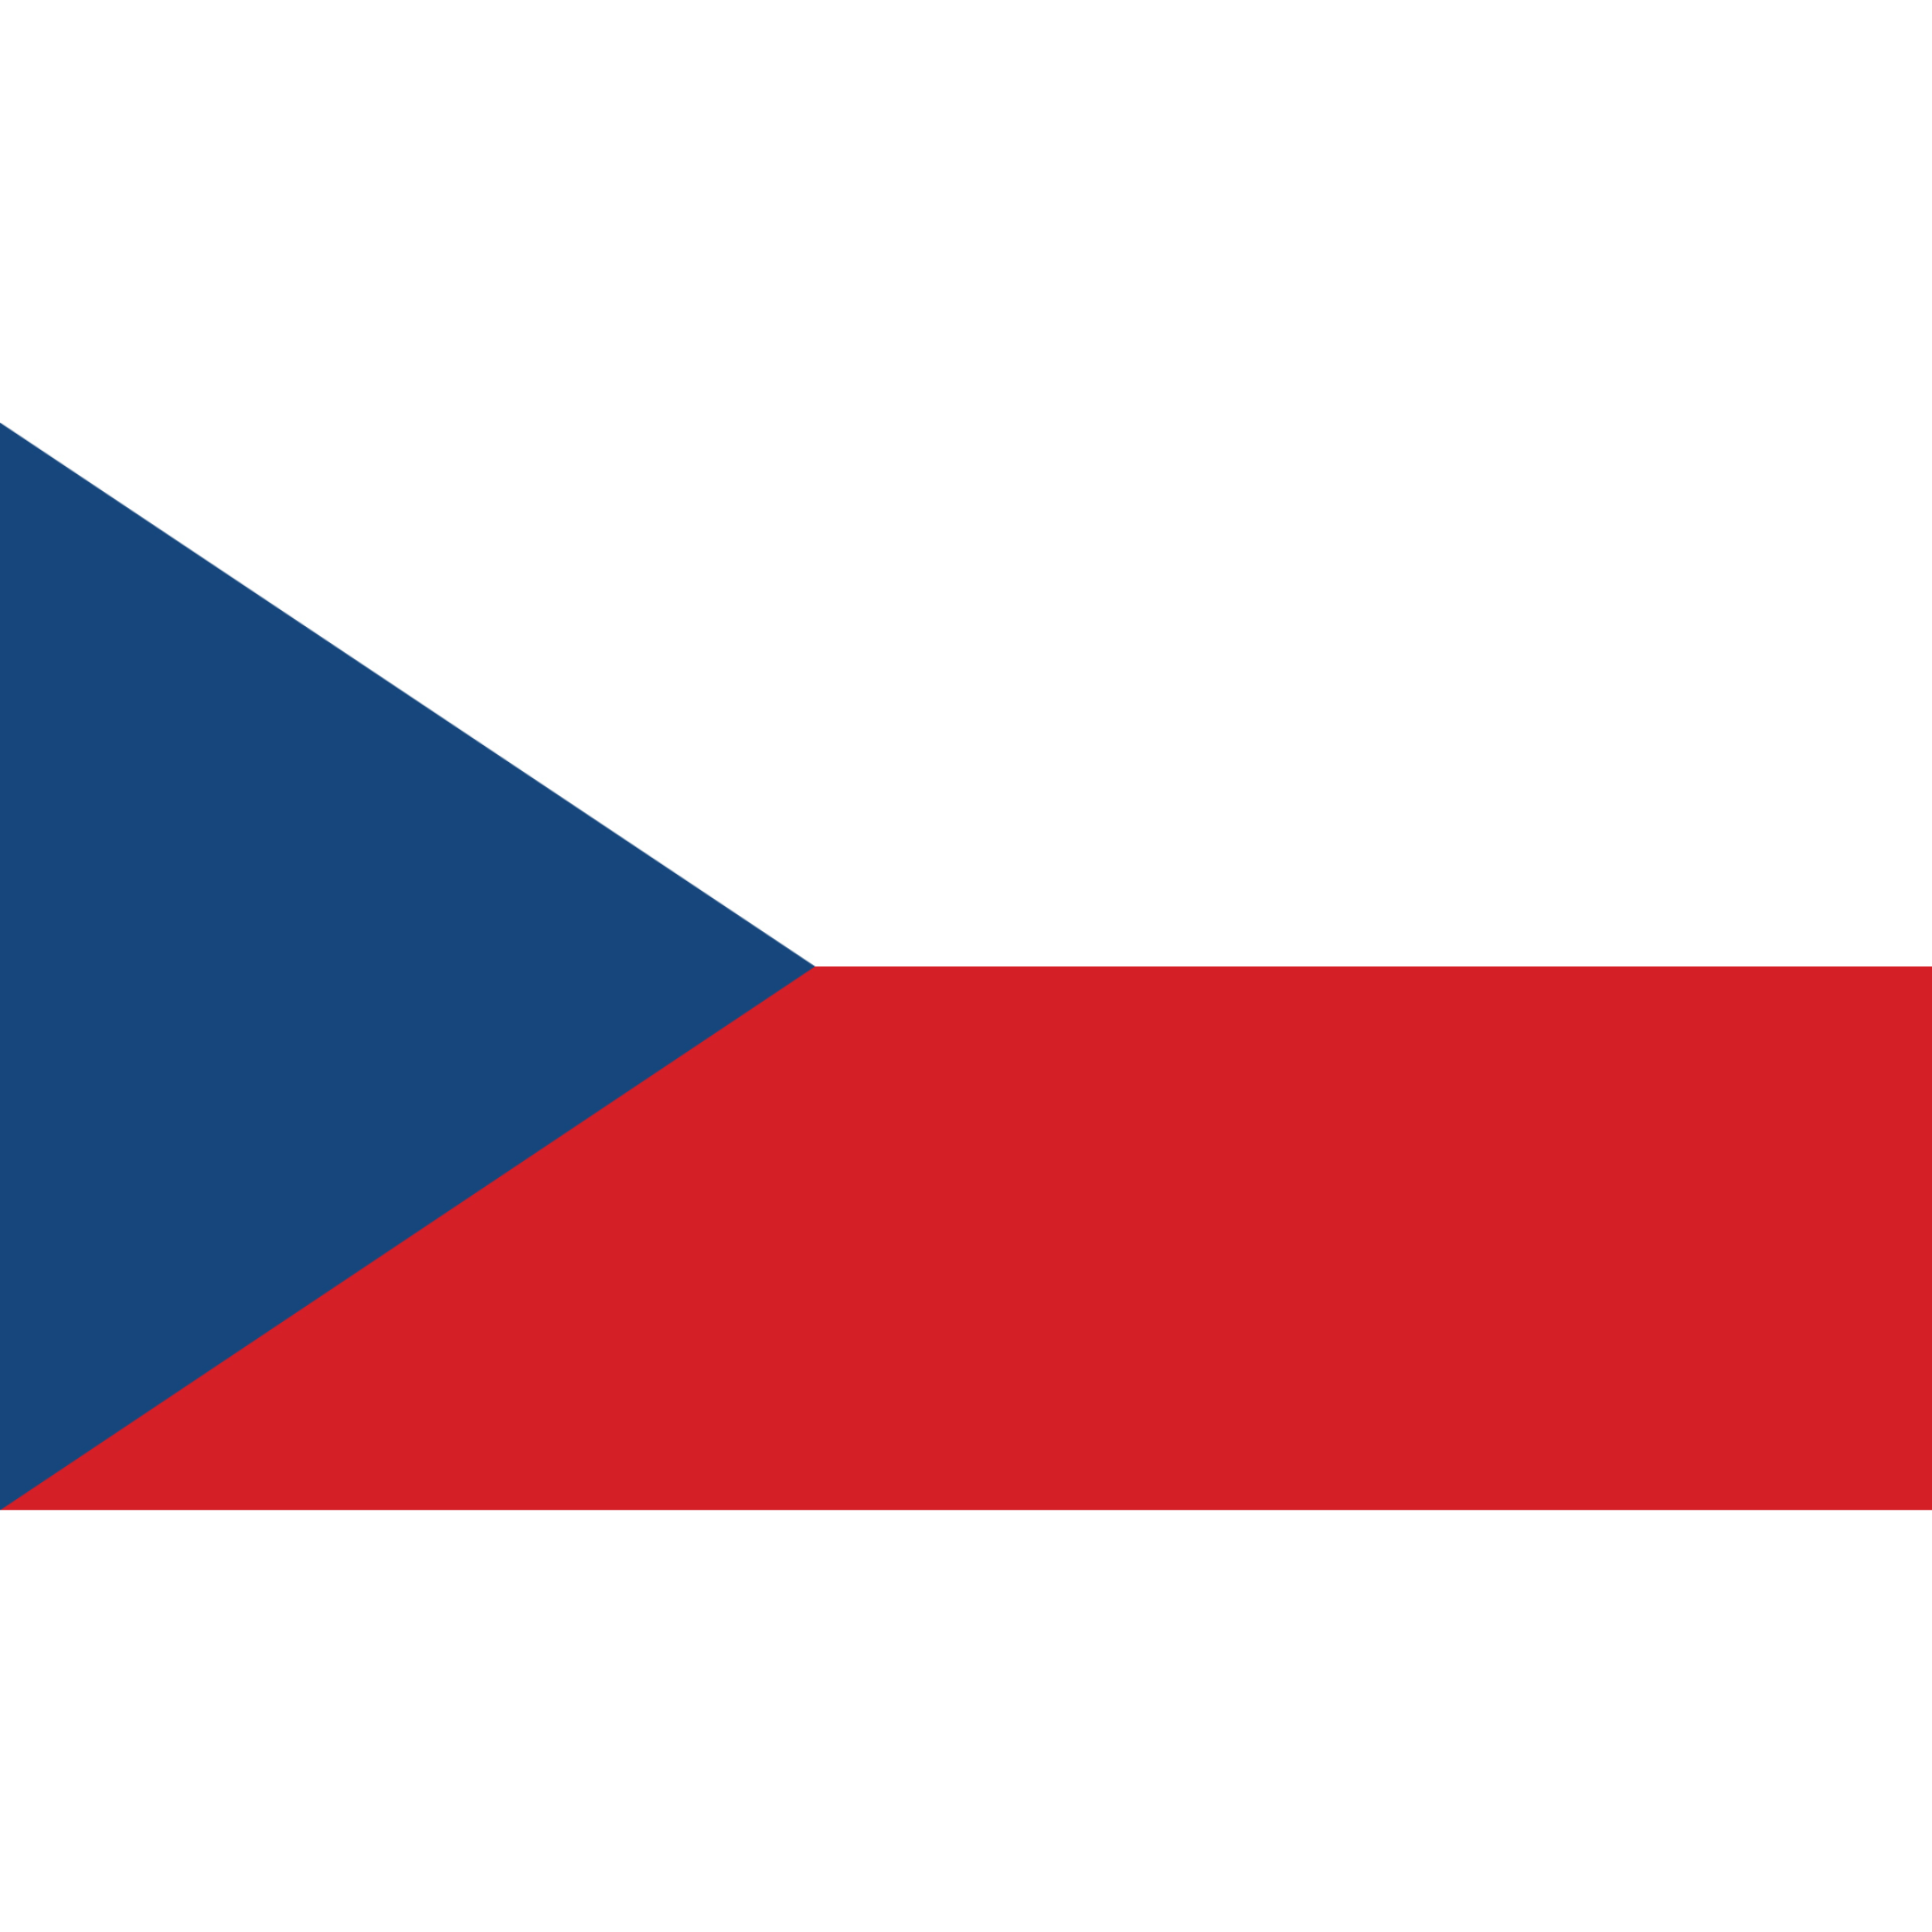 The flag of the Czech Republic Flag has 2 equal horizontal white and red bands and a blue triangle based on the left.